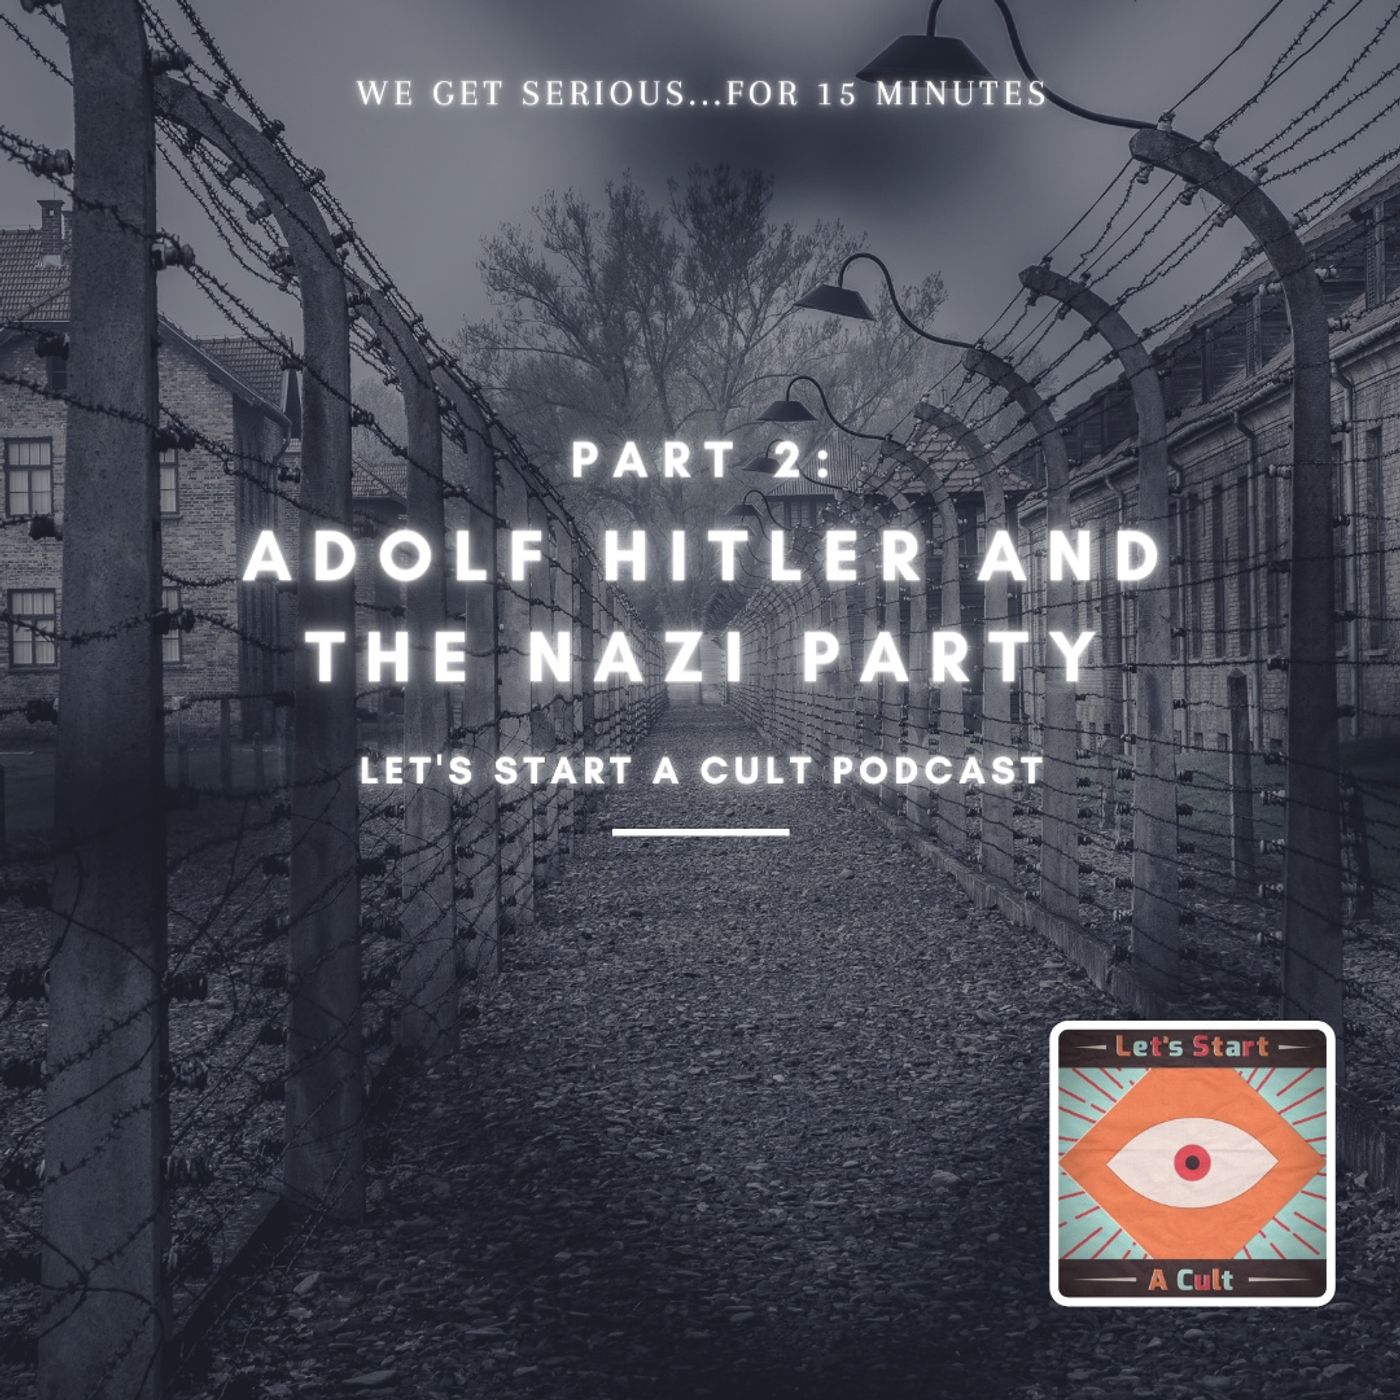 Part 2: Adolf Hitler And The Nazi Party